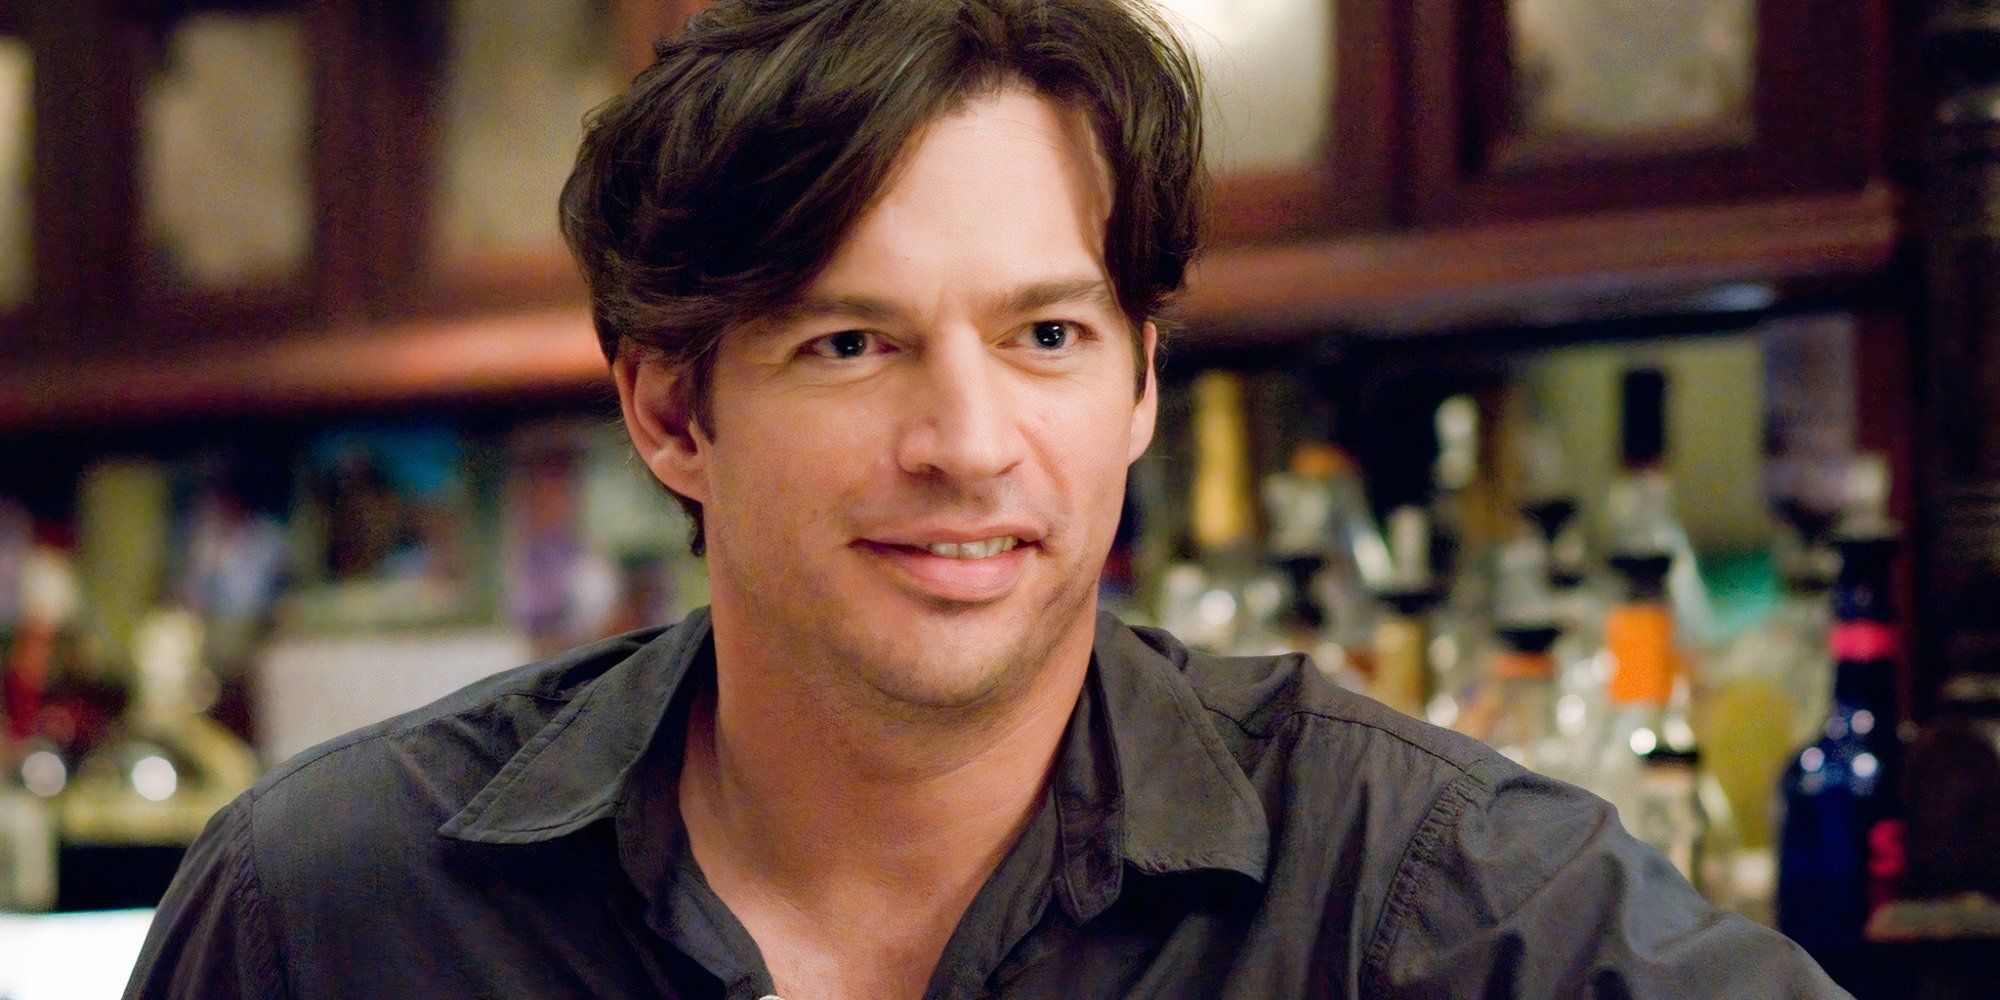 Harry Connick Jr. as Daniel in P.S. I Love You (2007)